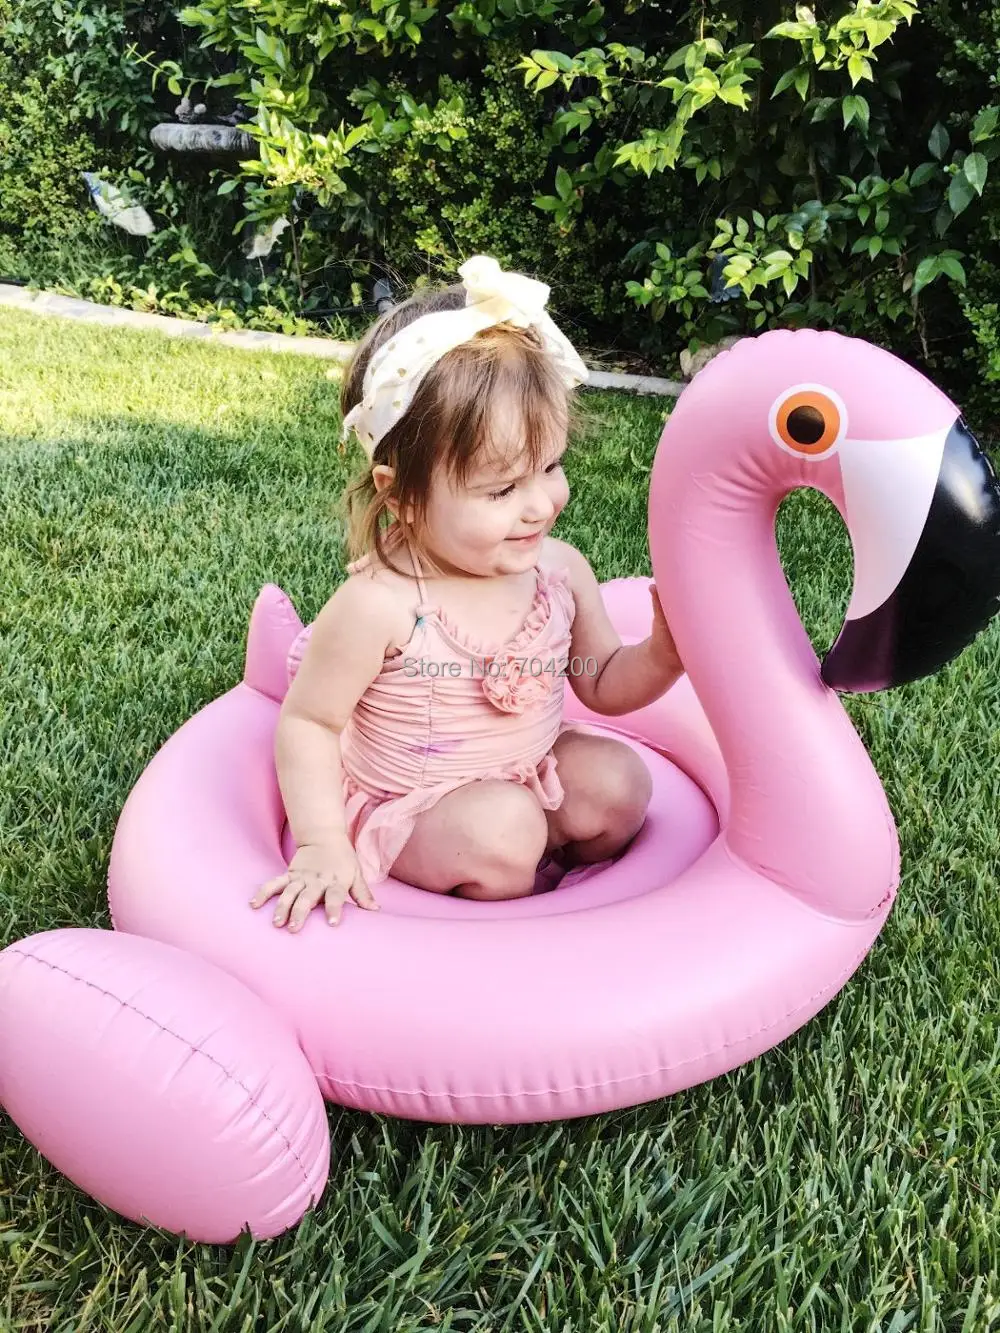 Mystery&Melody Baby Flamingo Pool Float Flamingo Inflatable Rafts Swim Ring Swimming Pool Toys for Baby Kids